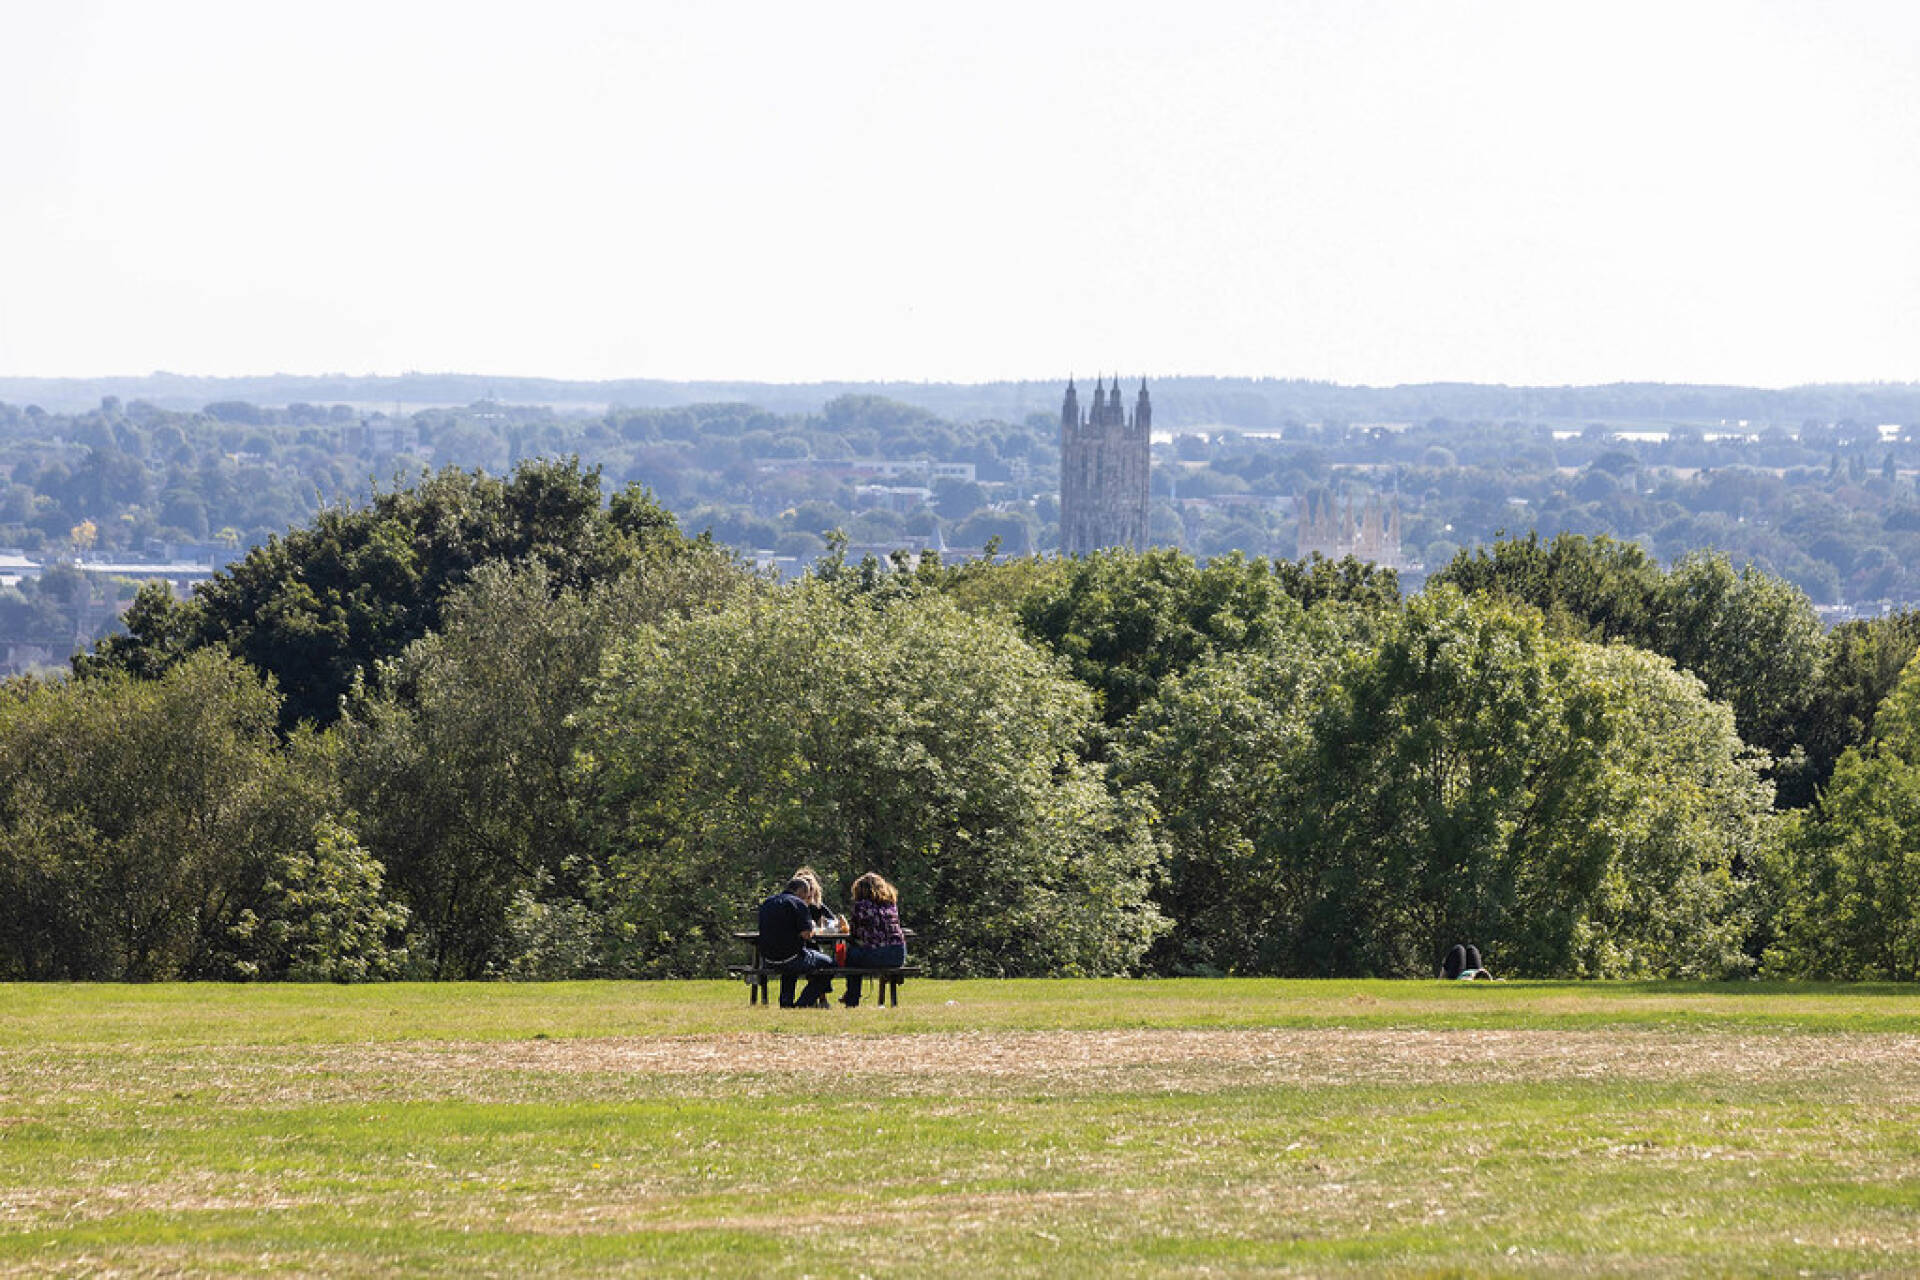 People seated on a bench in the background, with greenery around and Canterbury Cathedral and trees in the background.